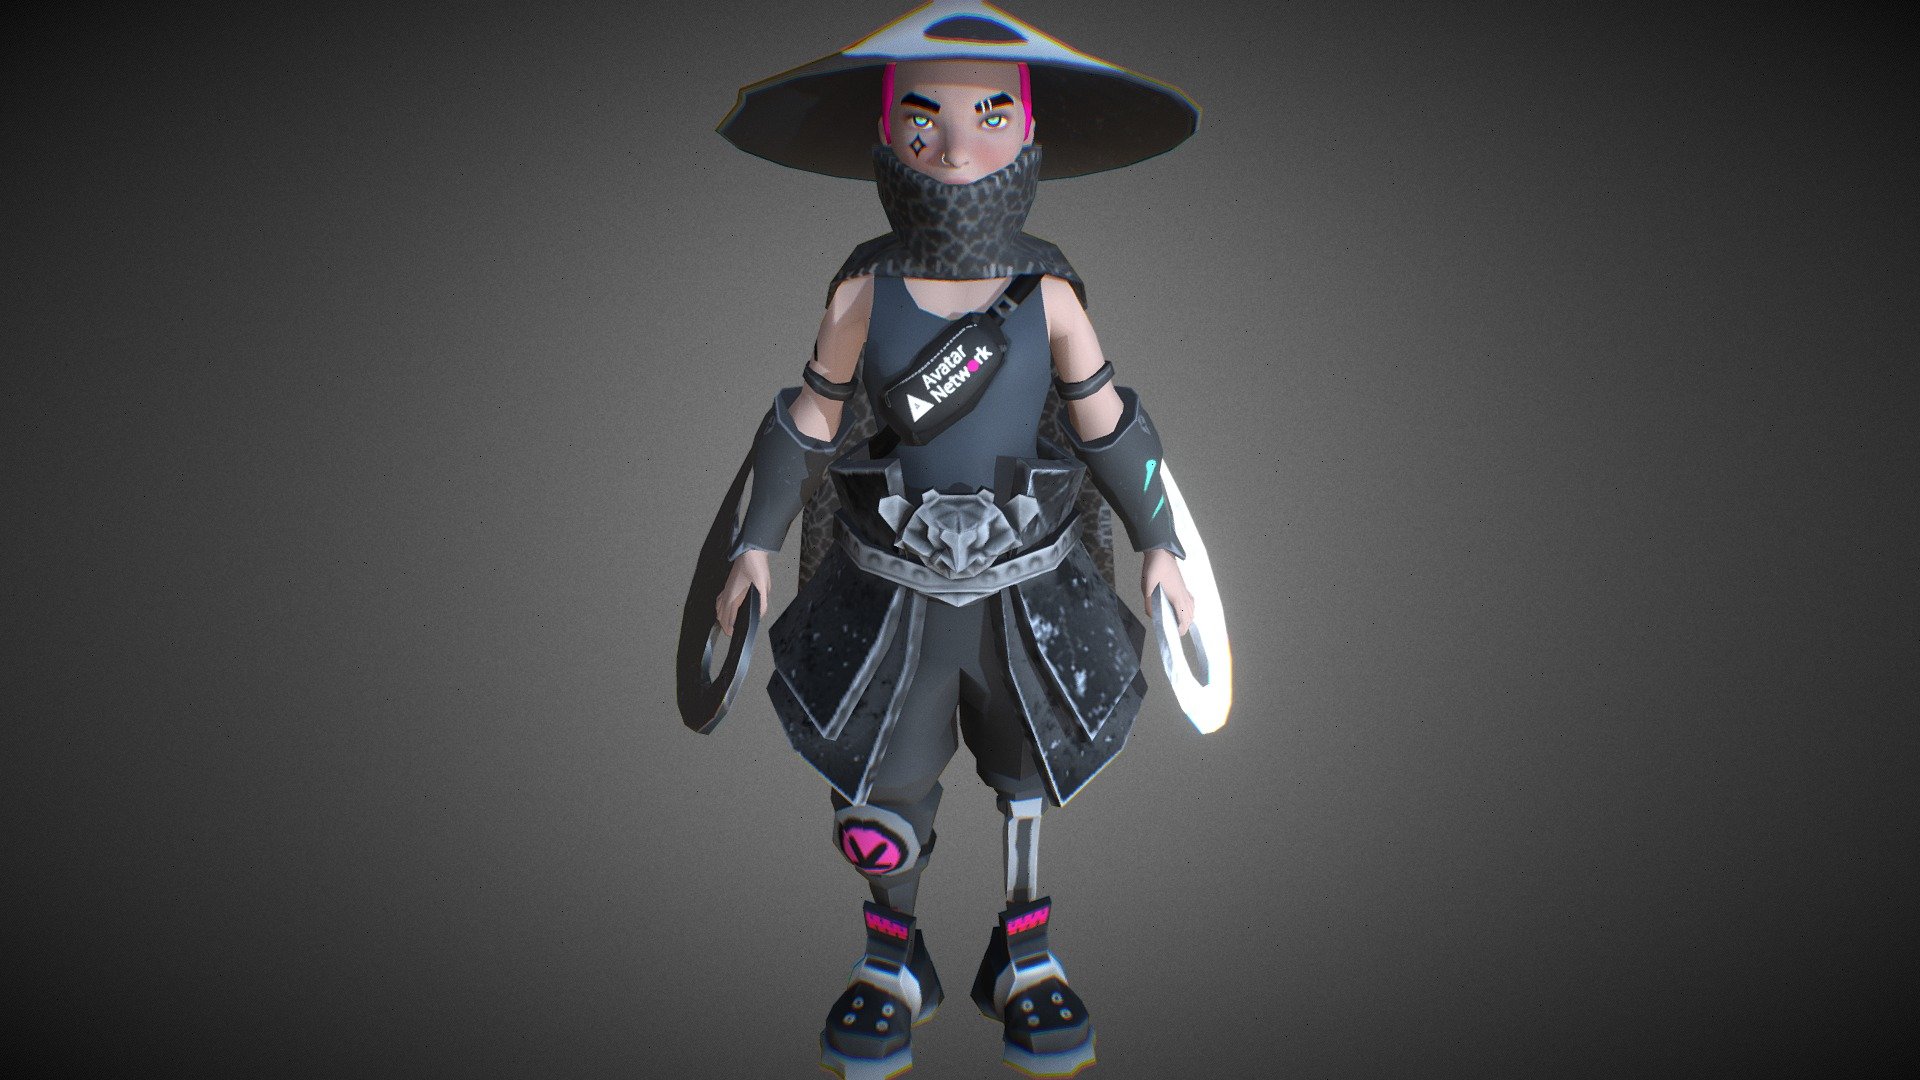 Digital Ronin in a Cyberpunk World🦾. This is a Decentraland wearable character designed and created by me for AvatarNetwork, showcasing my imagination of cyberpunk wuxia⚔️. For more information, please visit the website https://avatar.io/ .If you’re interested in customizing a character like this, please visit my personal website: zimon.cc - Cangqiong - Futuristic Cybernetic Assassin - 3D model by Zimon3D 3d model